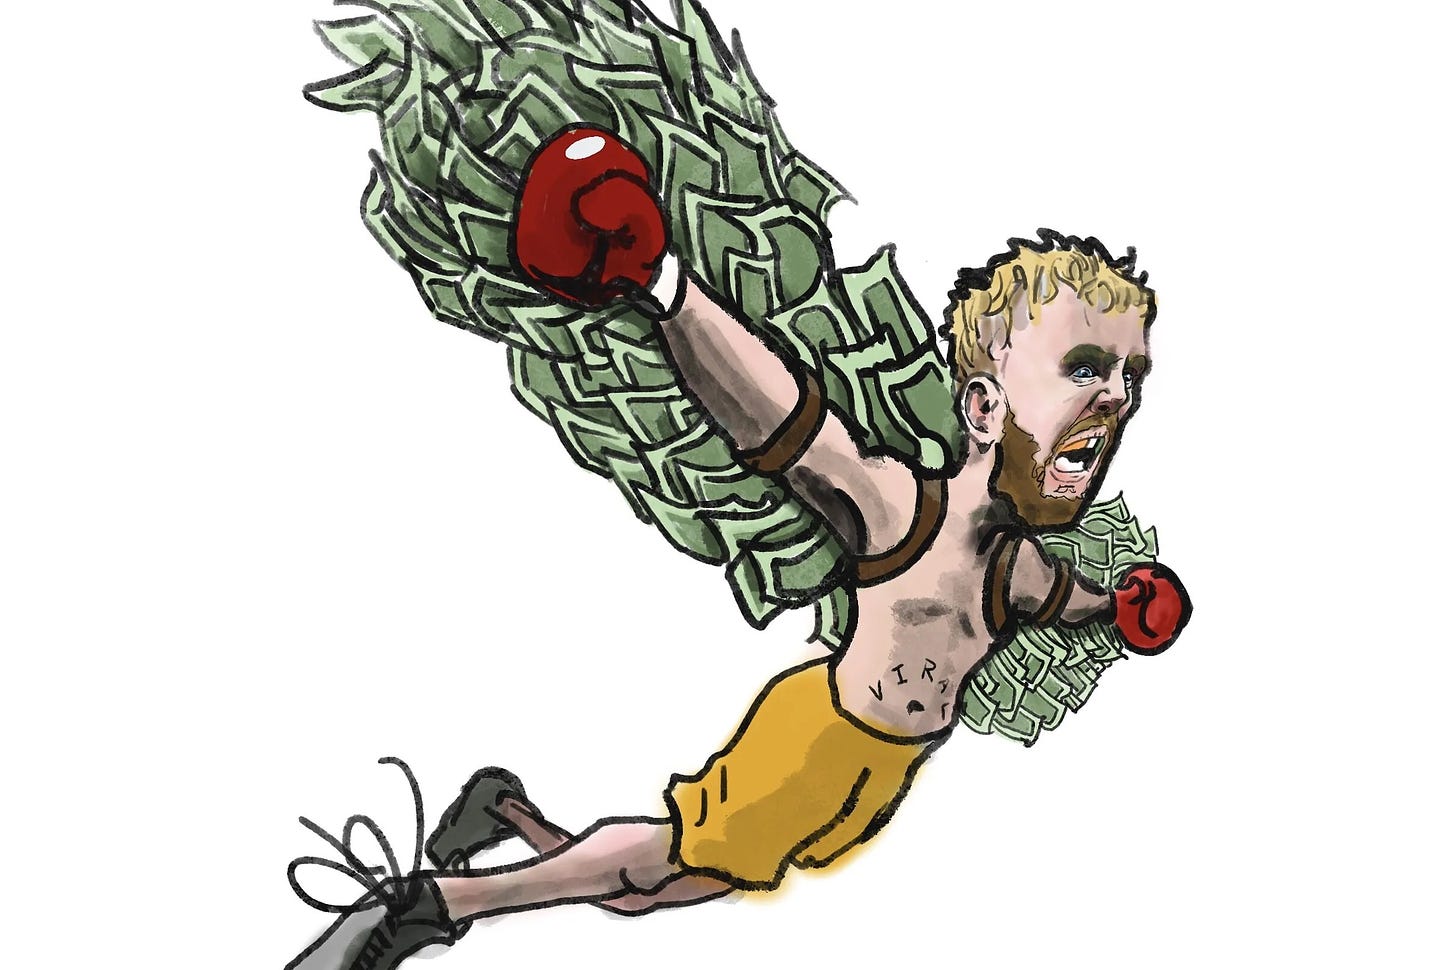 Jake Paul as Icarus with wings of money by Chris Rini